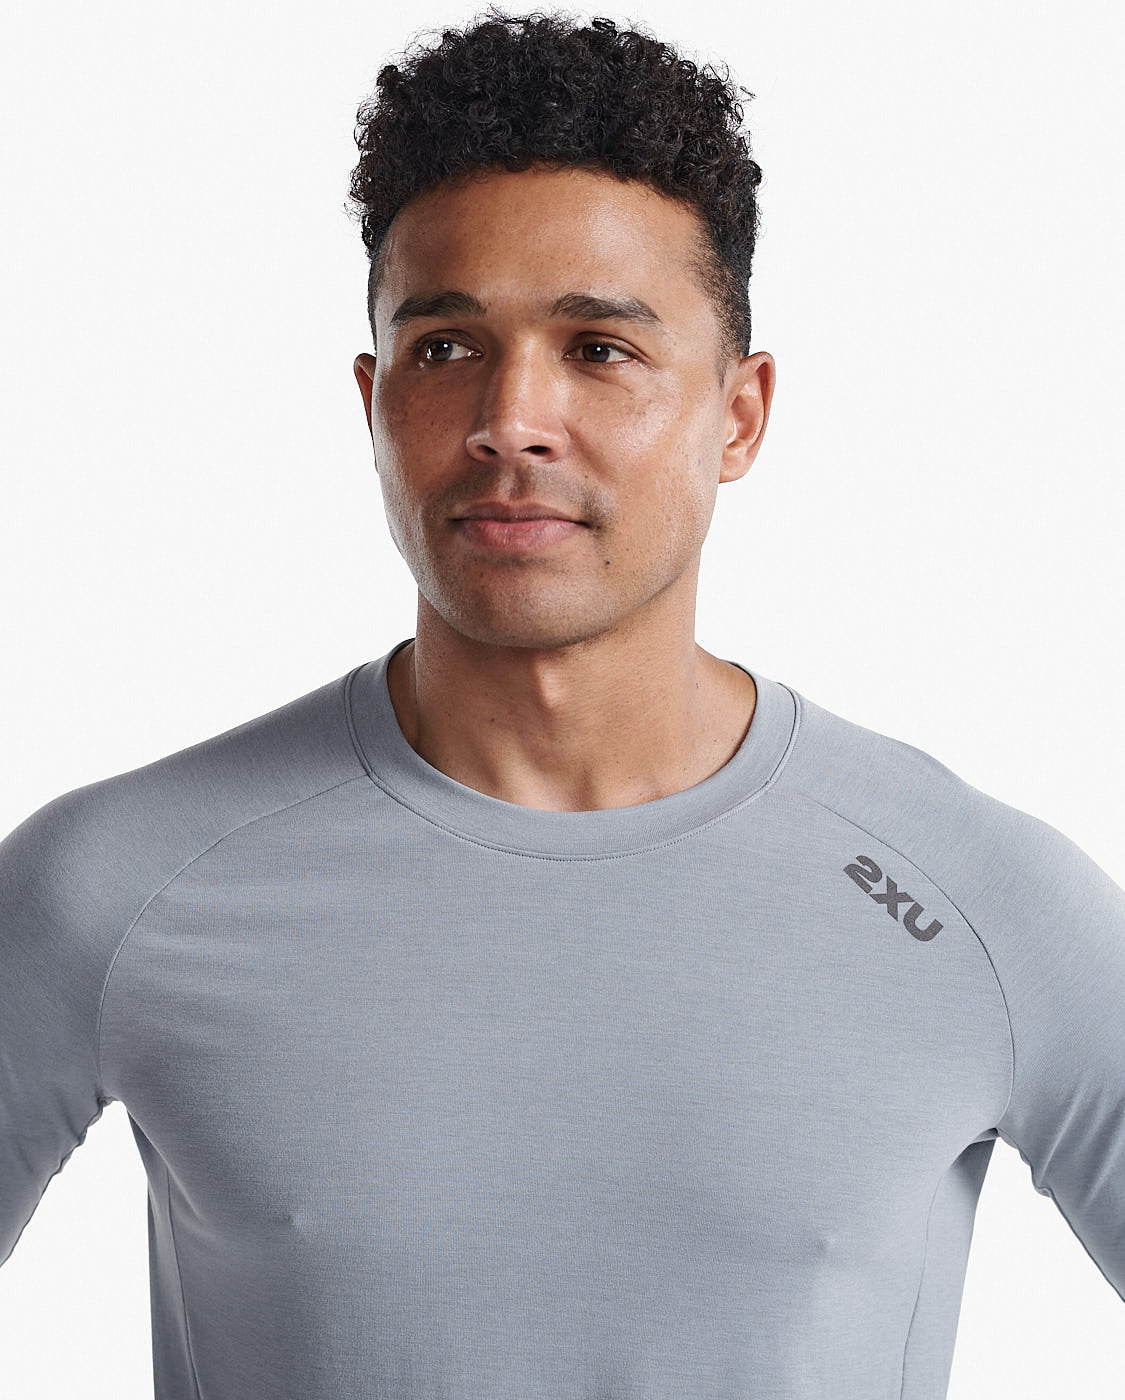 2XU Men's Ignition Base Layer | Assorted